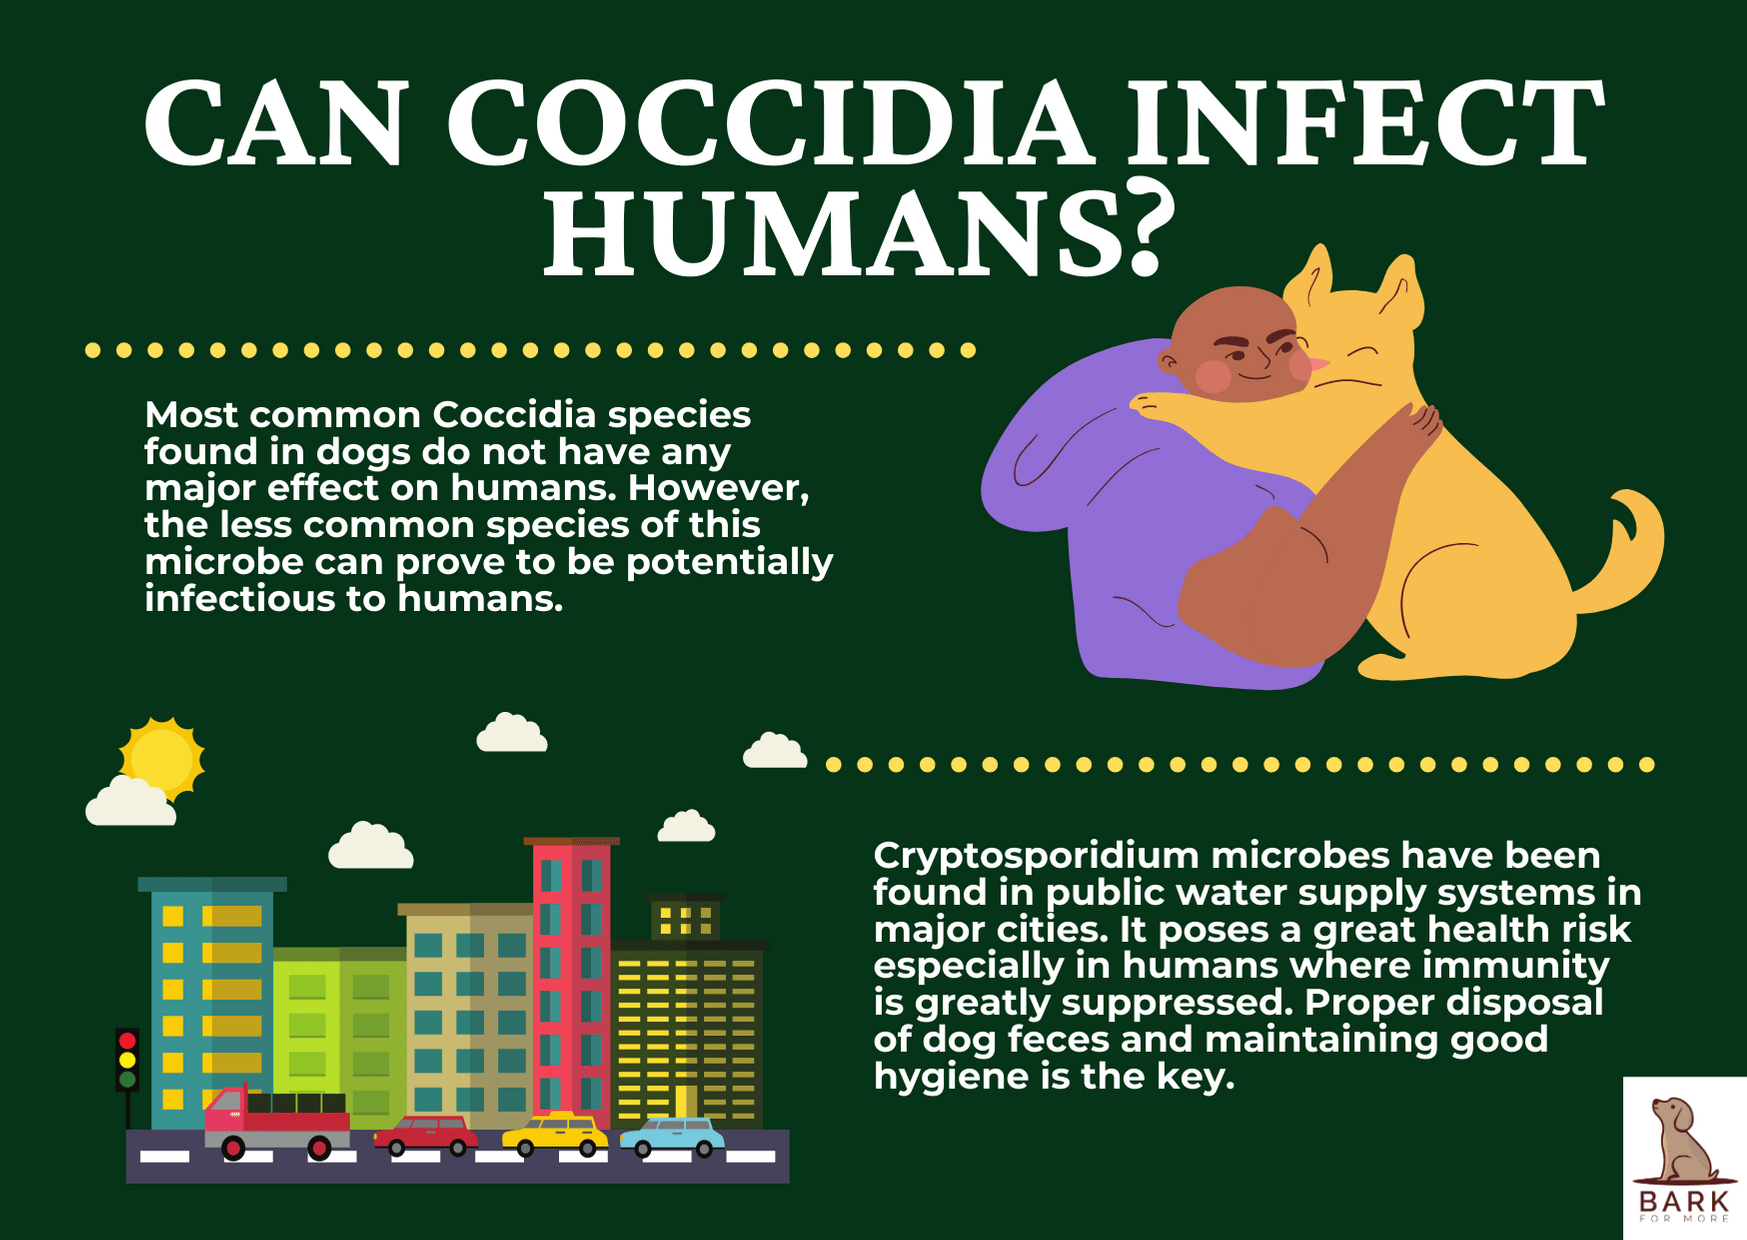 Can Coccidia infect humans